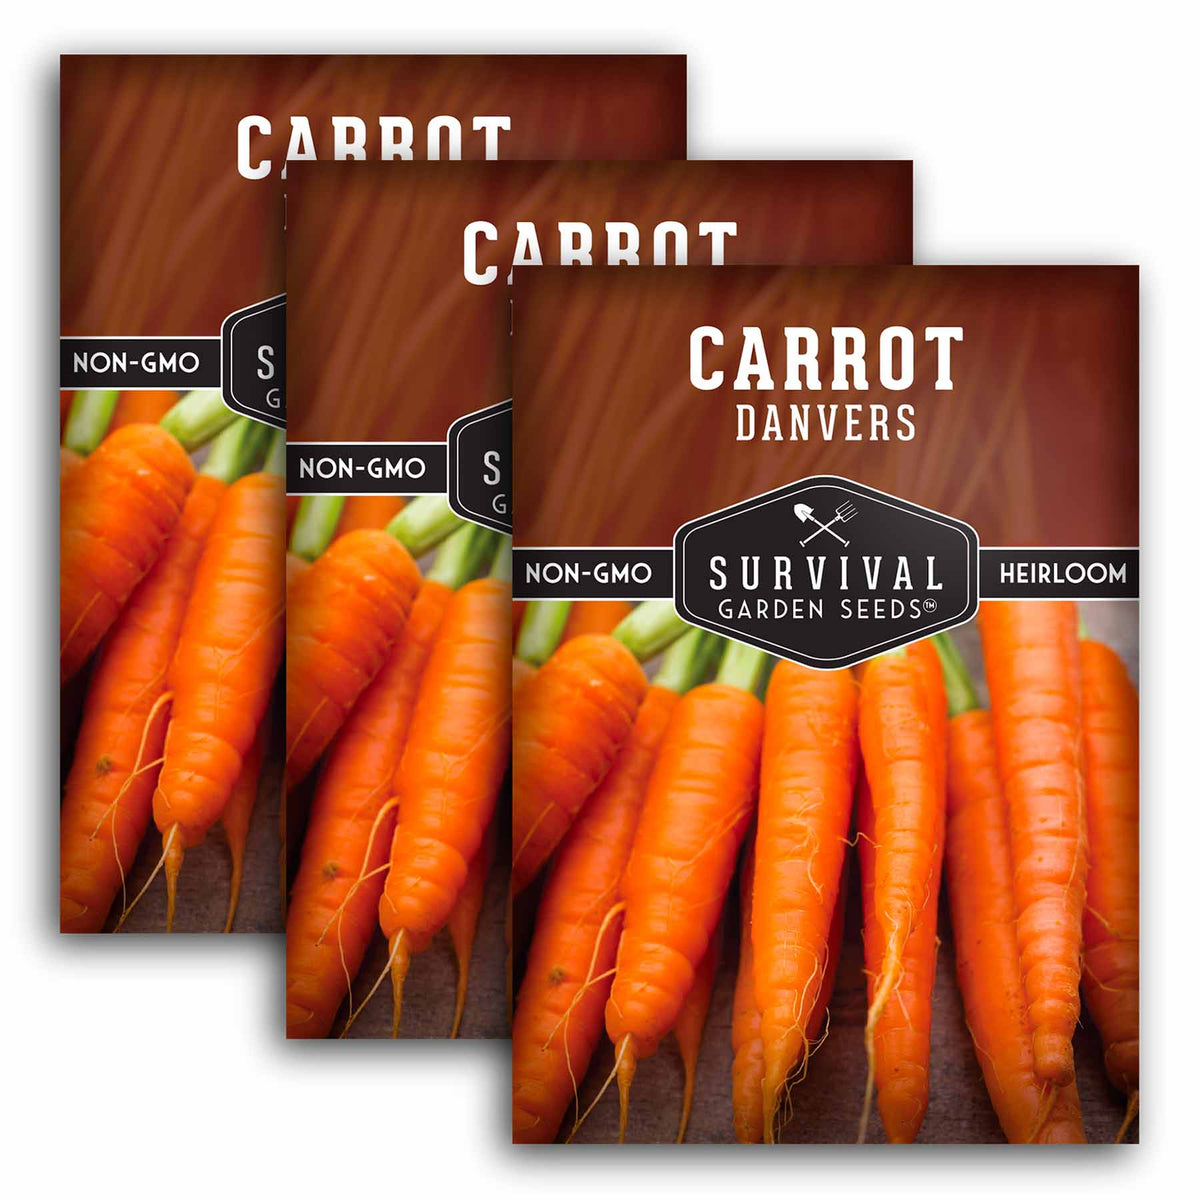 3 Packets of Danvers Carrot seeds